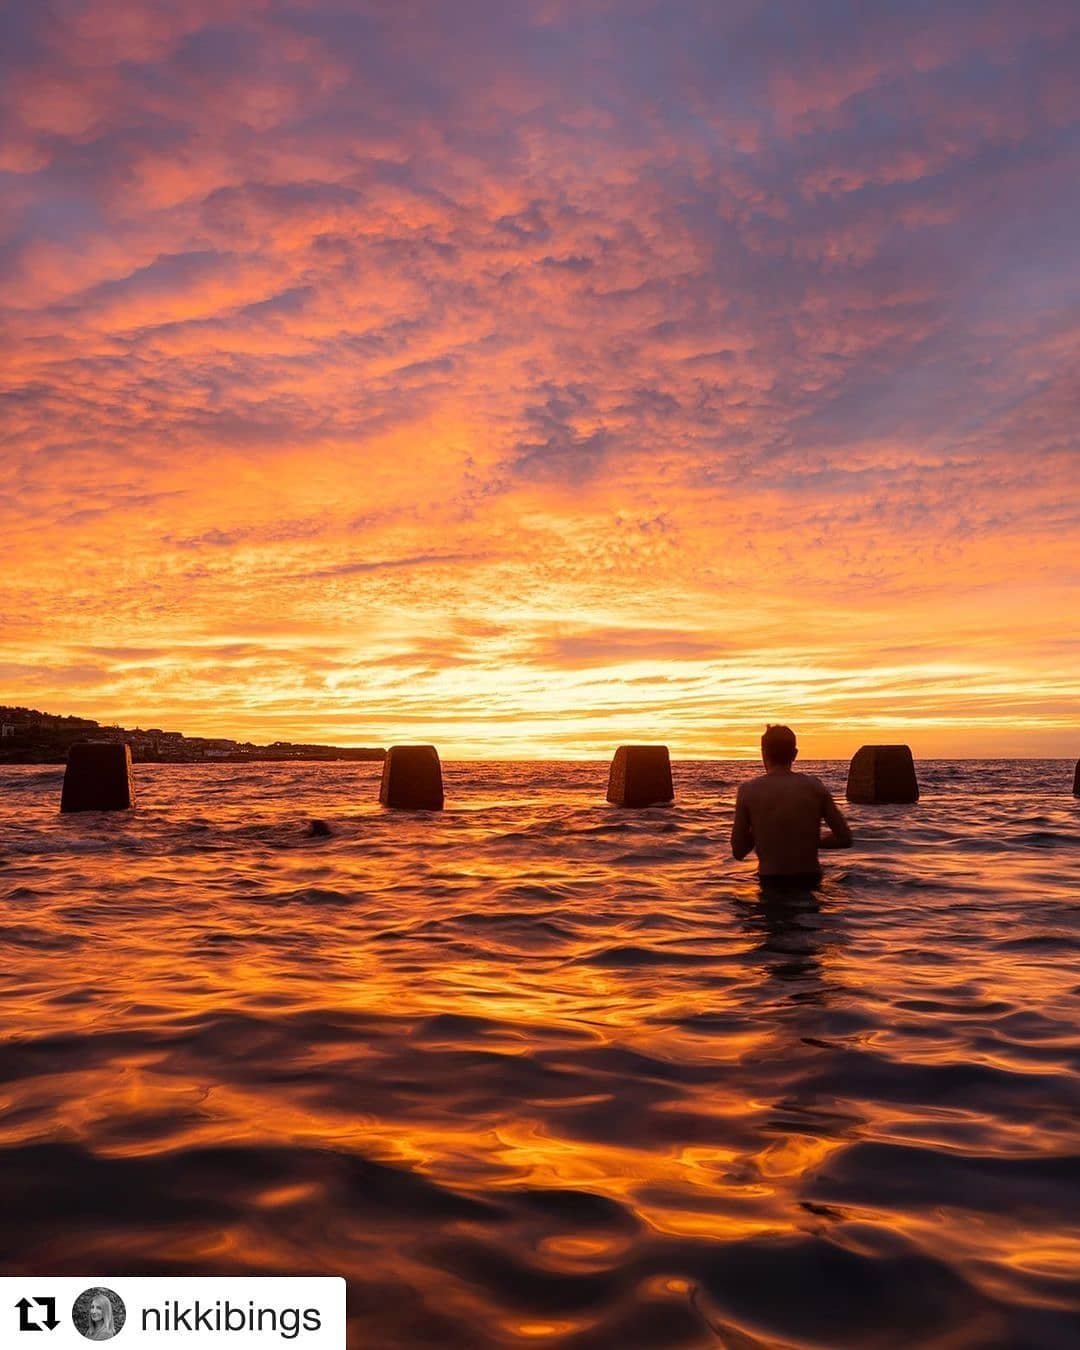 Are you a sunrise or a sunset catcher?&nbsp;
​This amazing photograph was taken at Coogee Rock Pool just 2 minutes walk from The Coogee View Beachfront Serviced Apartments.&nbsp;
​
​Stay with us and enjoy this beautiful nature that surrounds us.&nbsp